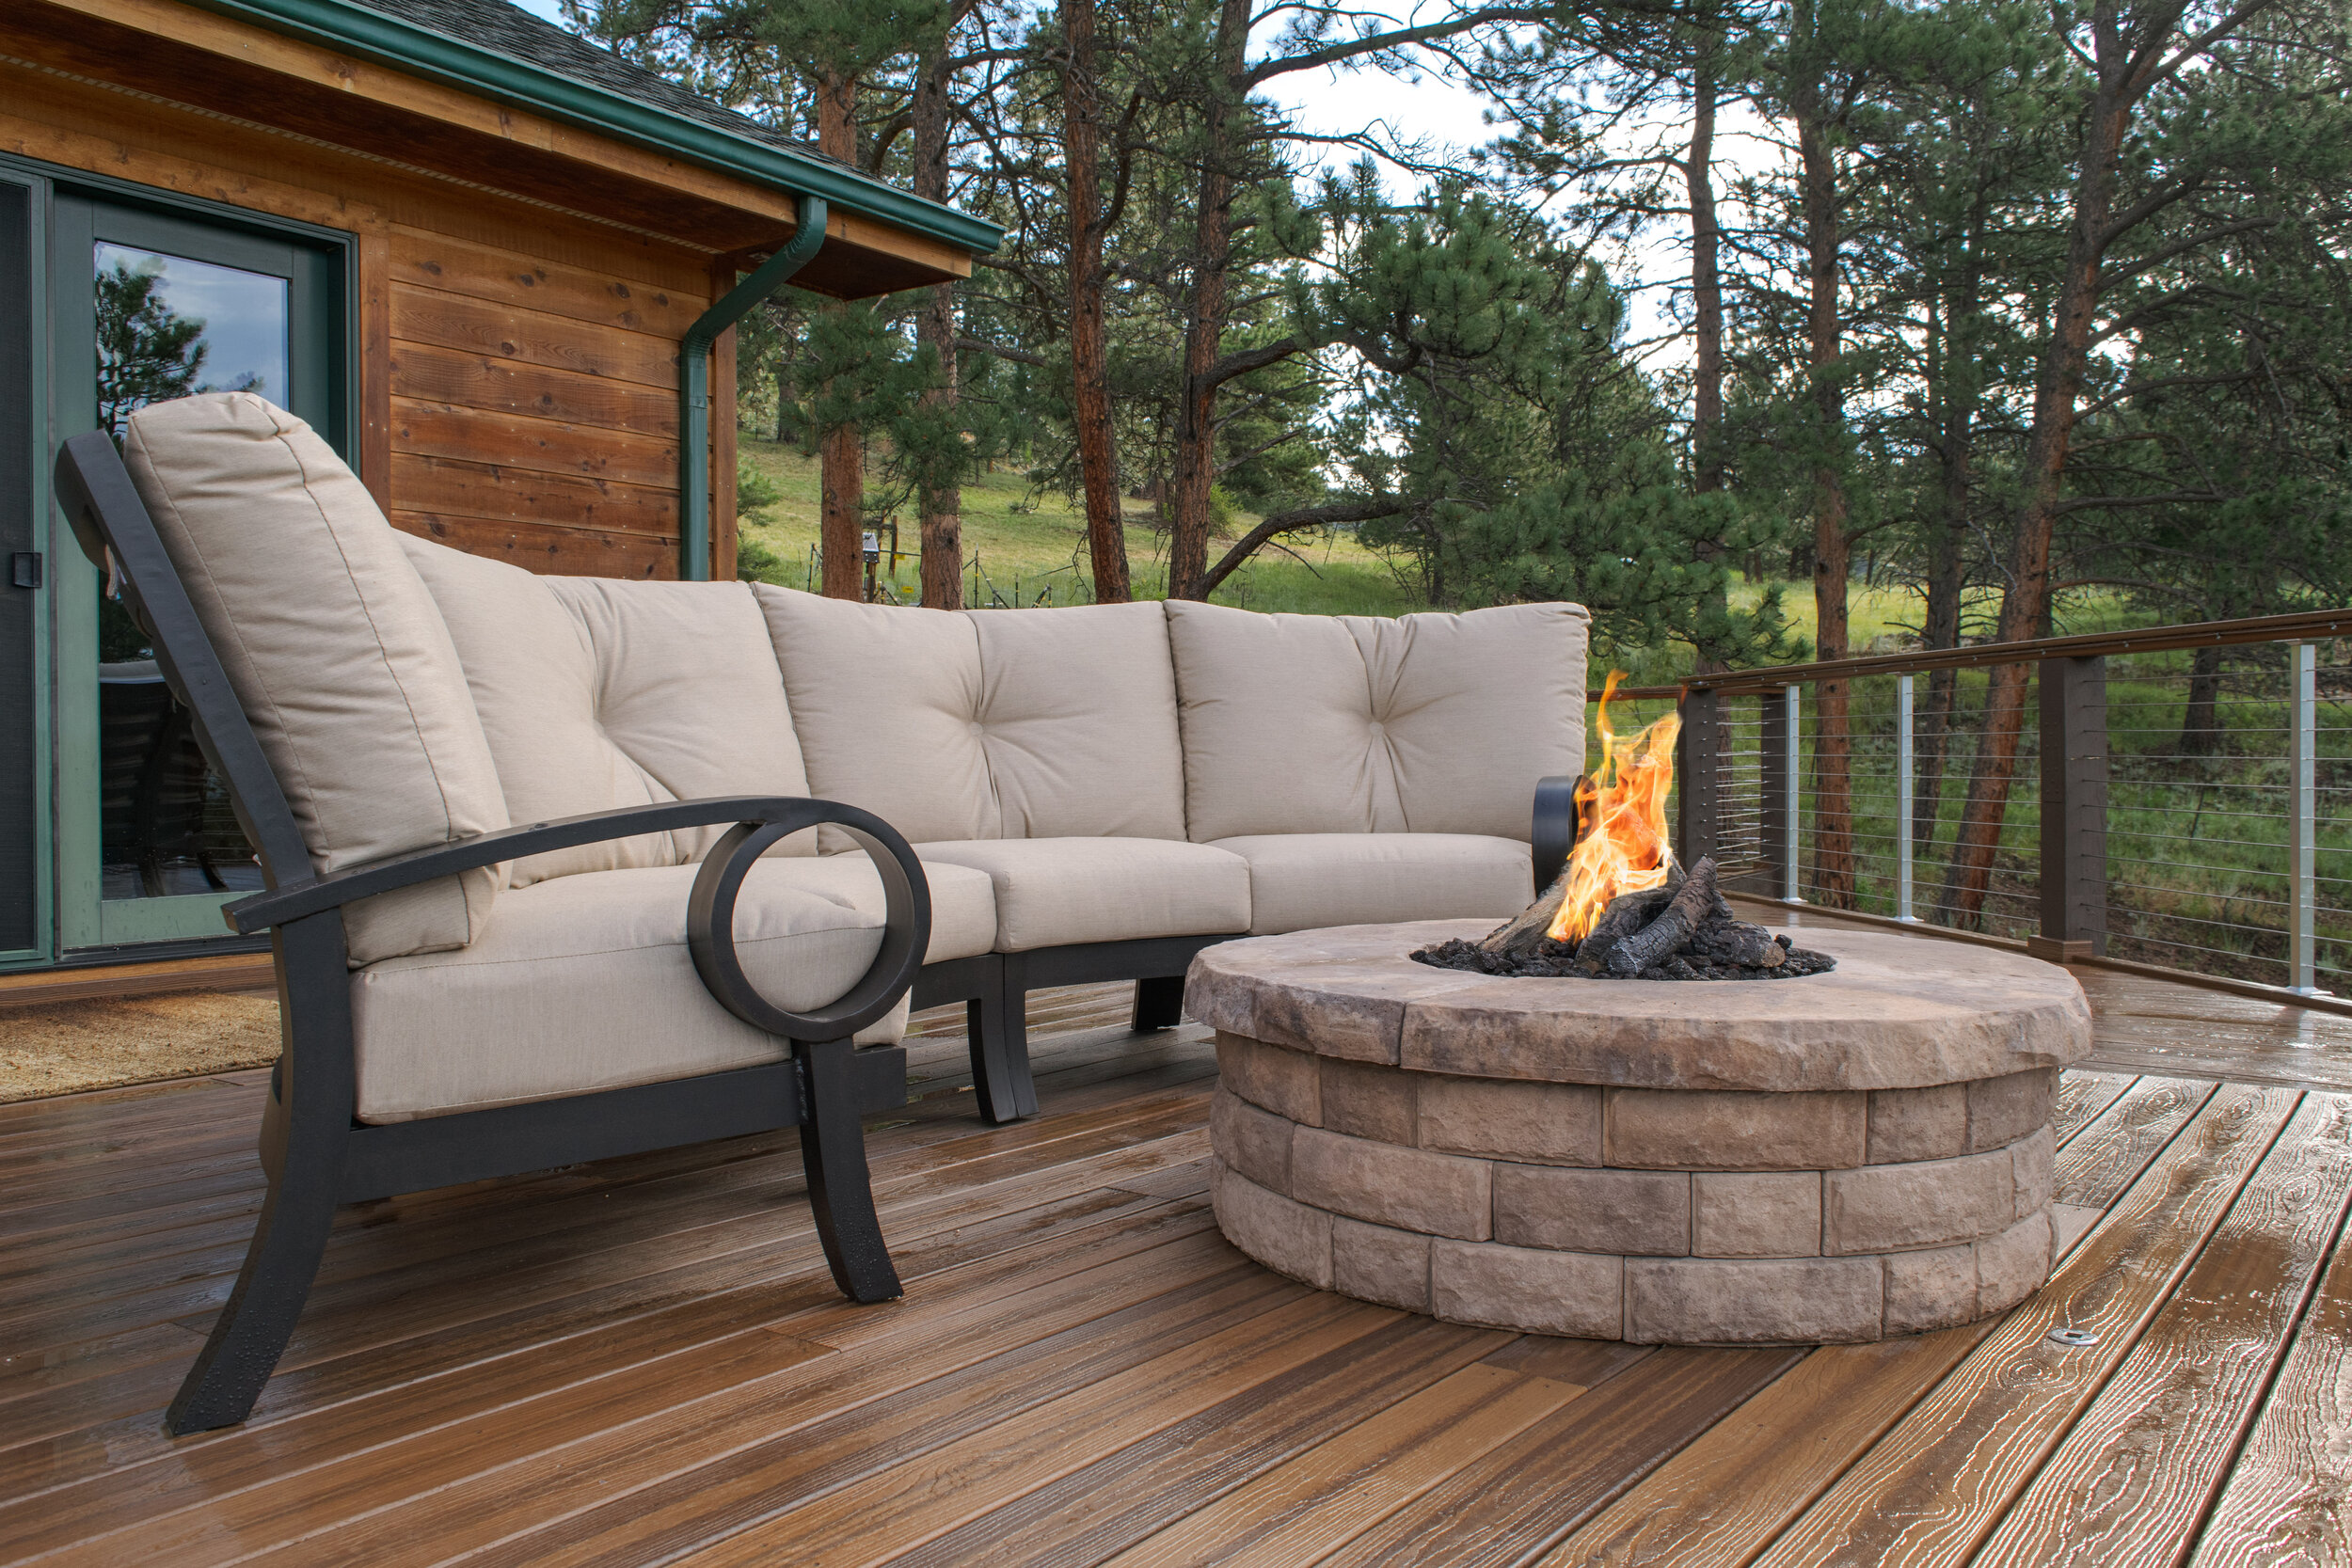 Outdoor Space With A Gas Fire Pit, Deck Fire Pit Images